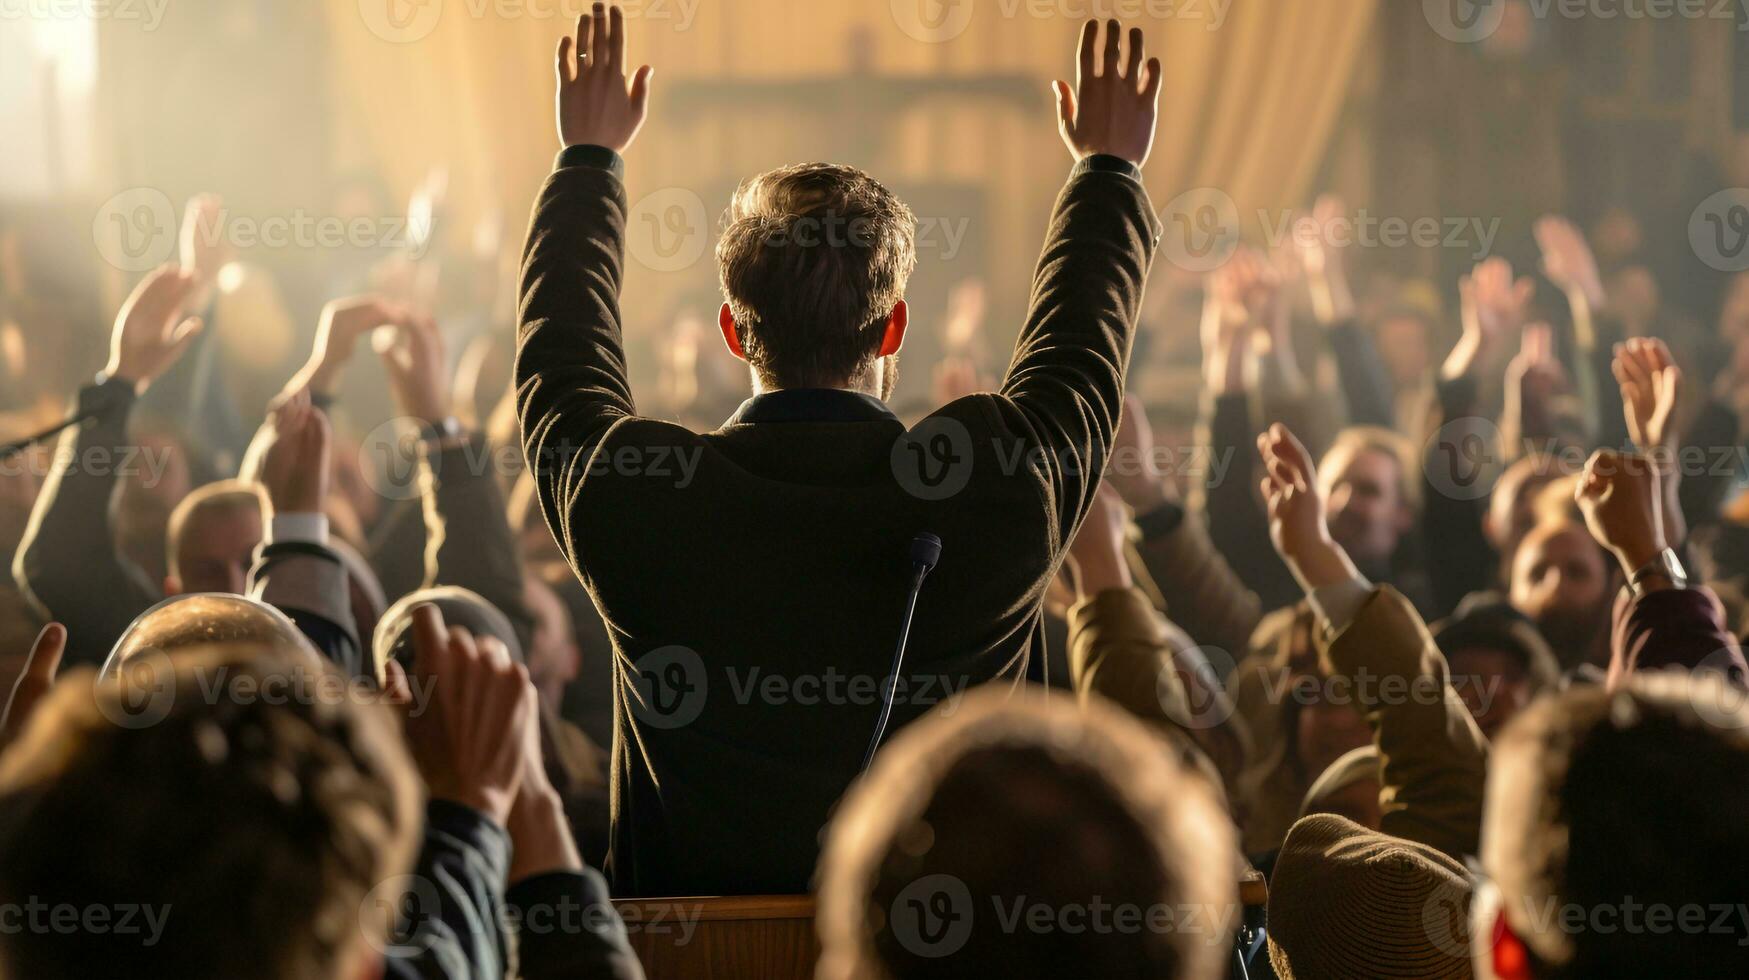 A person is standing in front of a crowd of people giving a speech, mental health images, photorealistic illustration photo